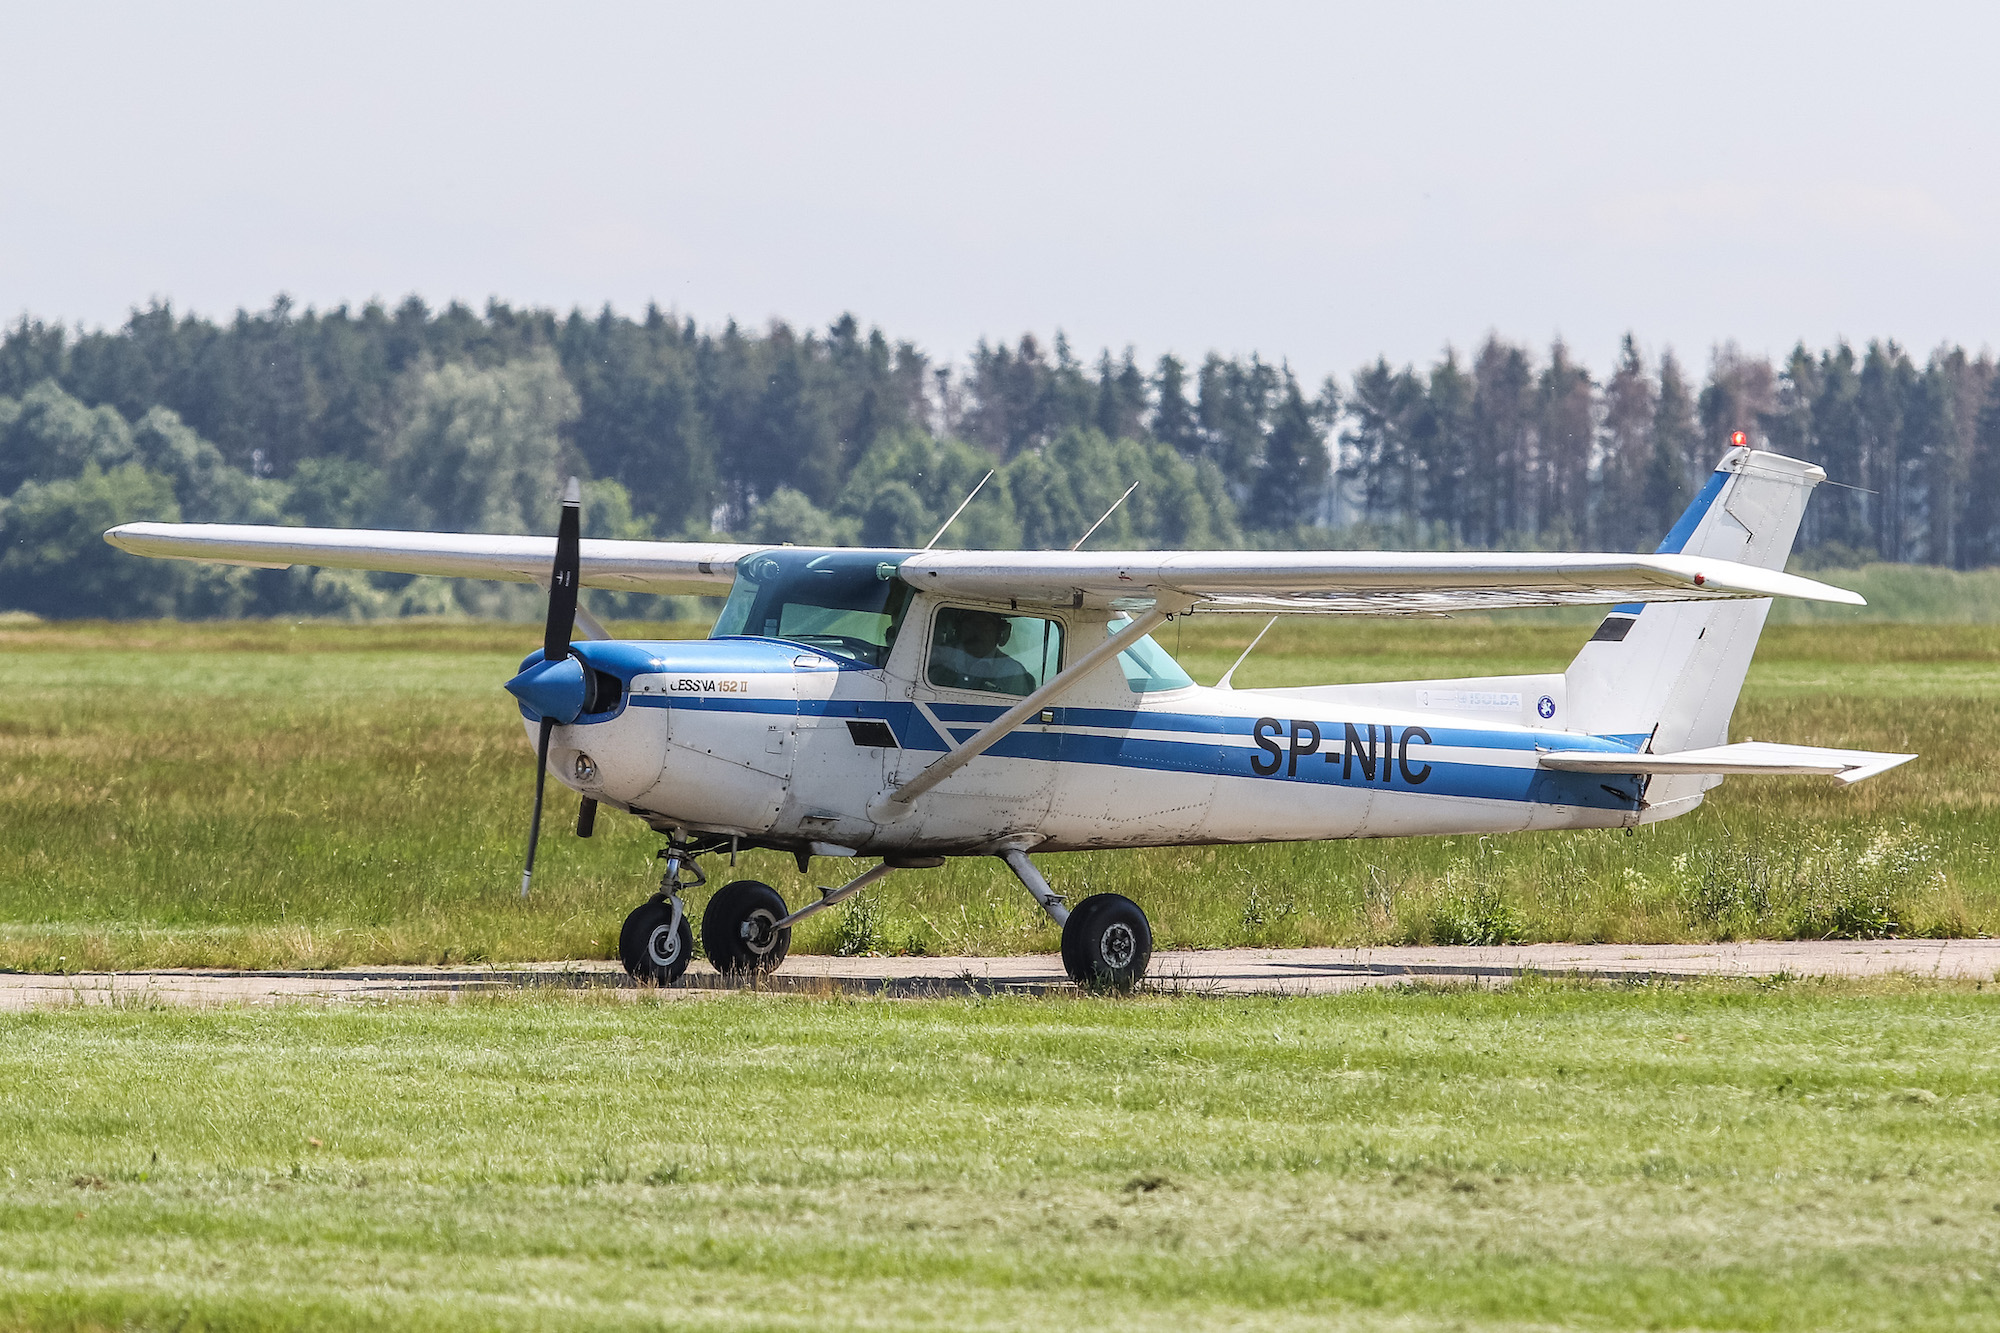 A Cessna 152 airplane taxies on small runway on June 14, 2019